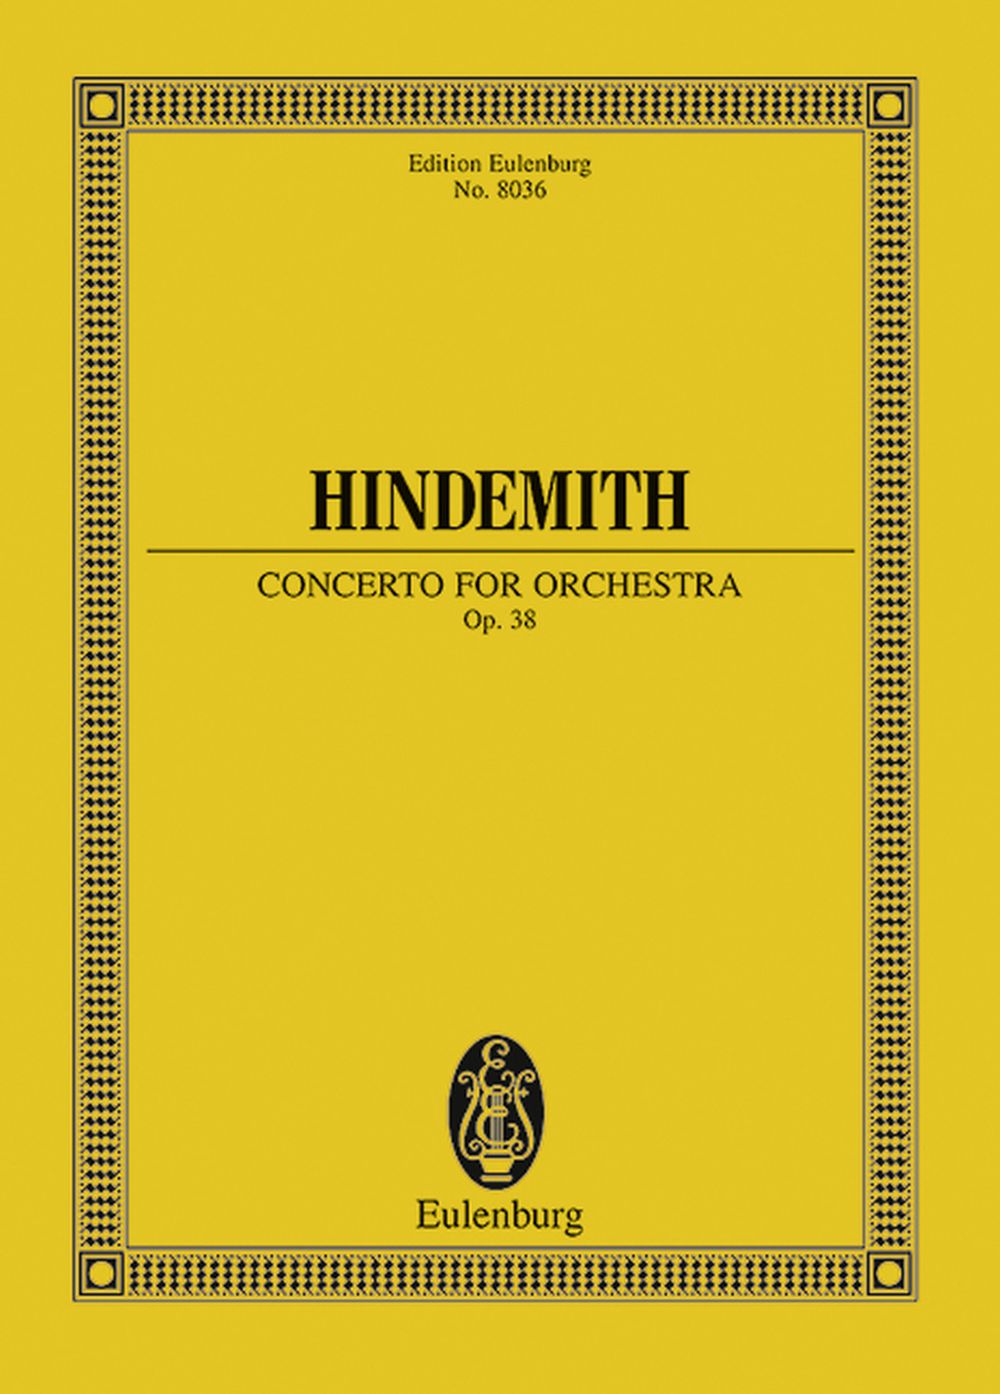 Paul Hindemith: Concerto for Orchestra op. 38: Orchestra: Miniature Score